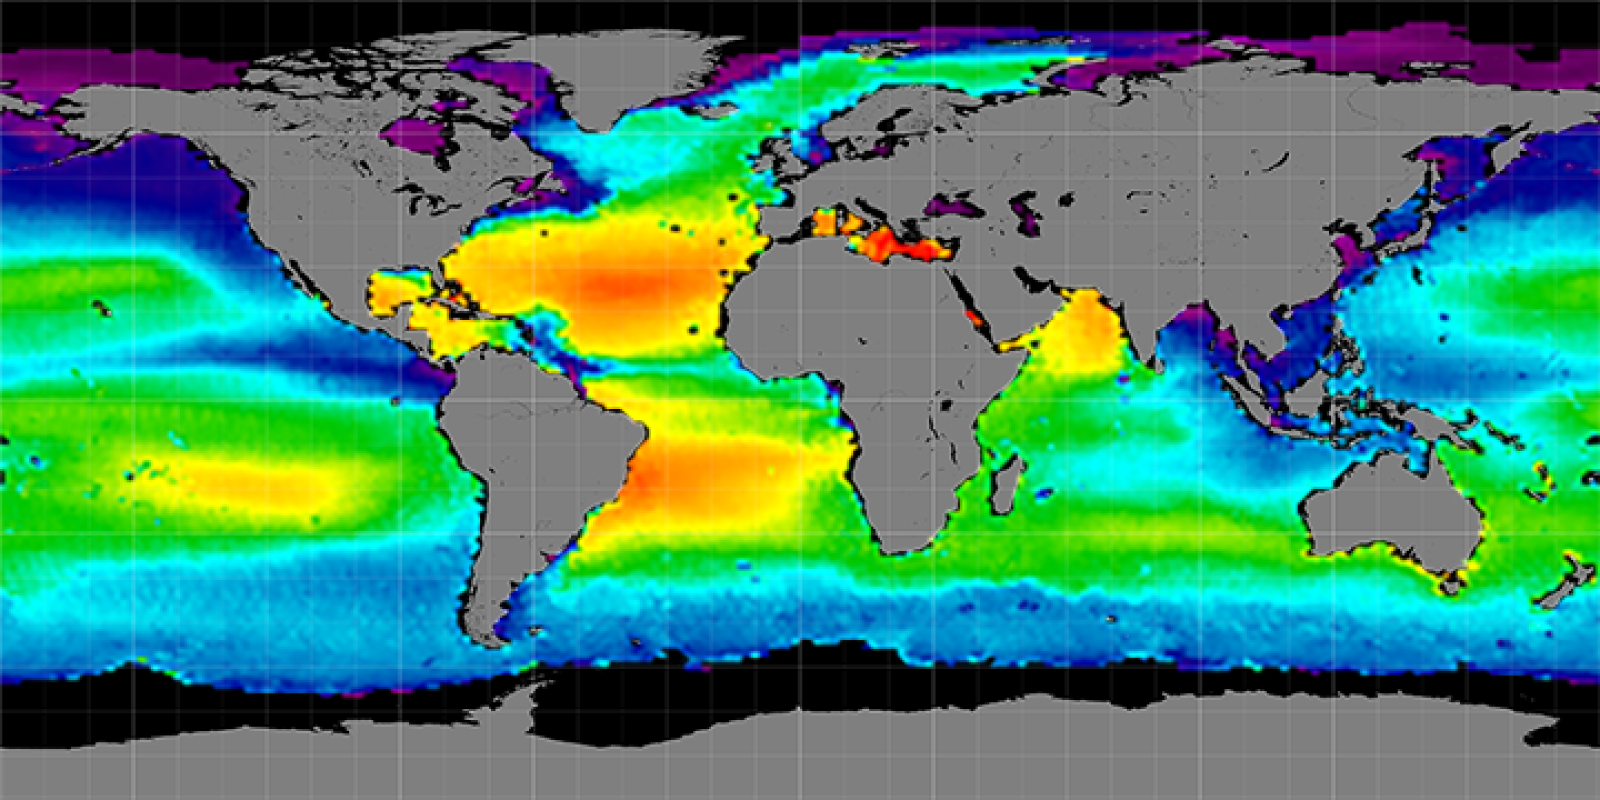 Global sea surface salinity maps averaged by month and season